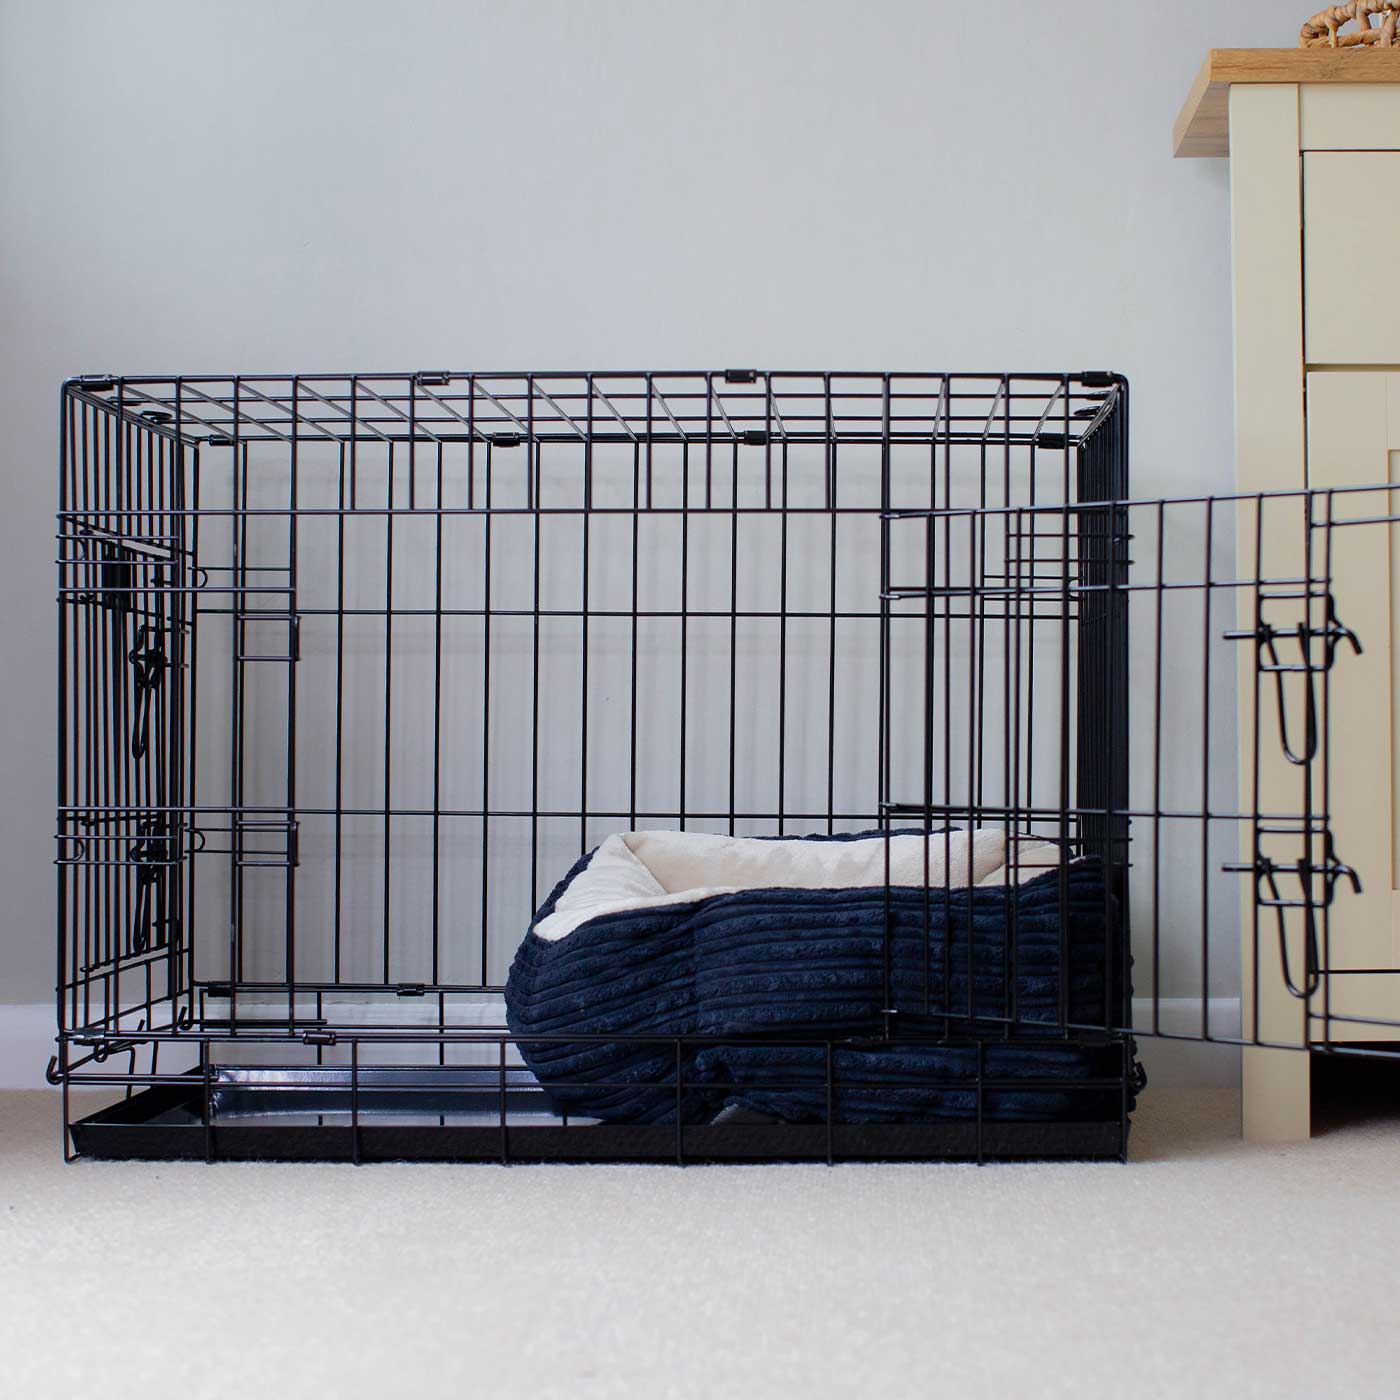 [color:navy plush] Cozy & Calm Puppy Cage Bed, The Perfect Dog Cage Accessory For The Ultimate Dog Den! In Stunning Navy Essentials Plush! Available To Personalize at Lords & Labradors US